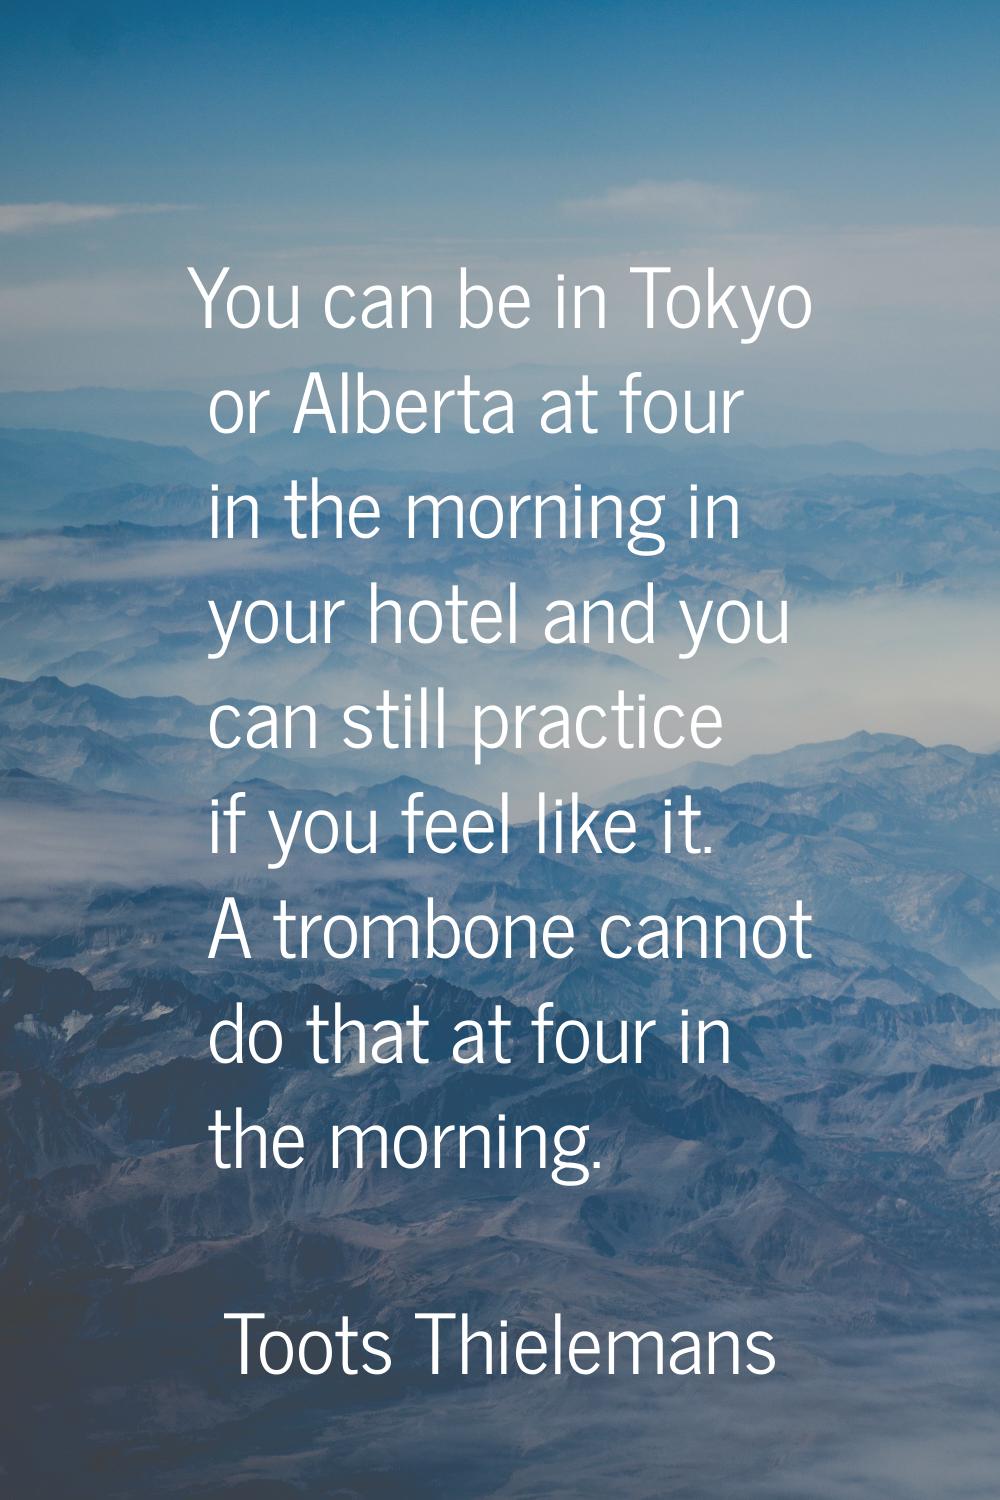 You can be in Tokyo or Alberta at four in the morning in your hotel and you can still practice if y